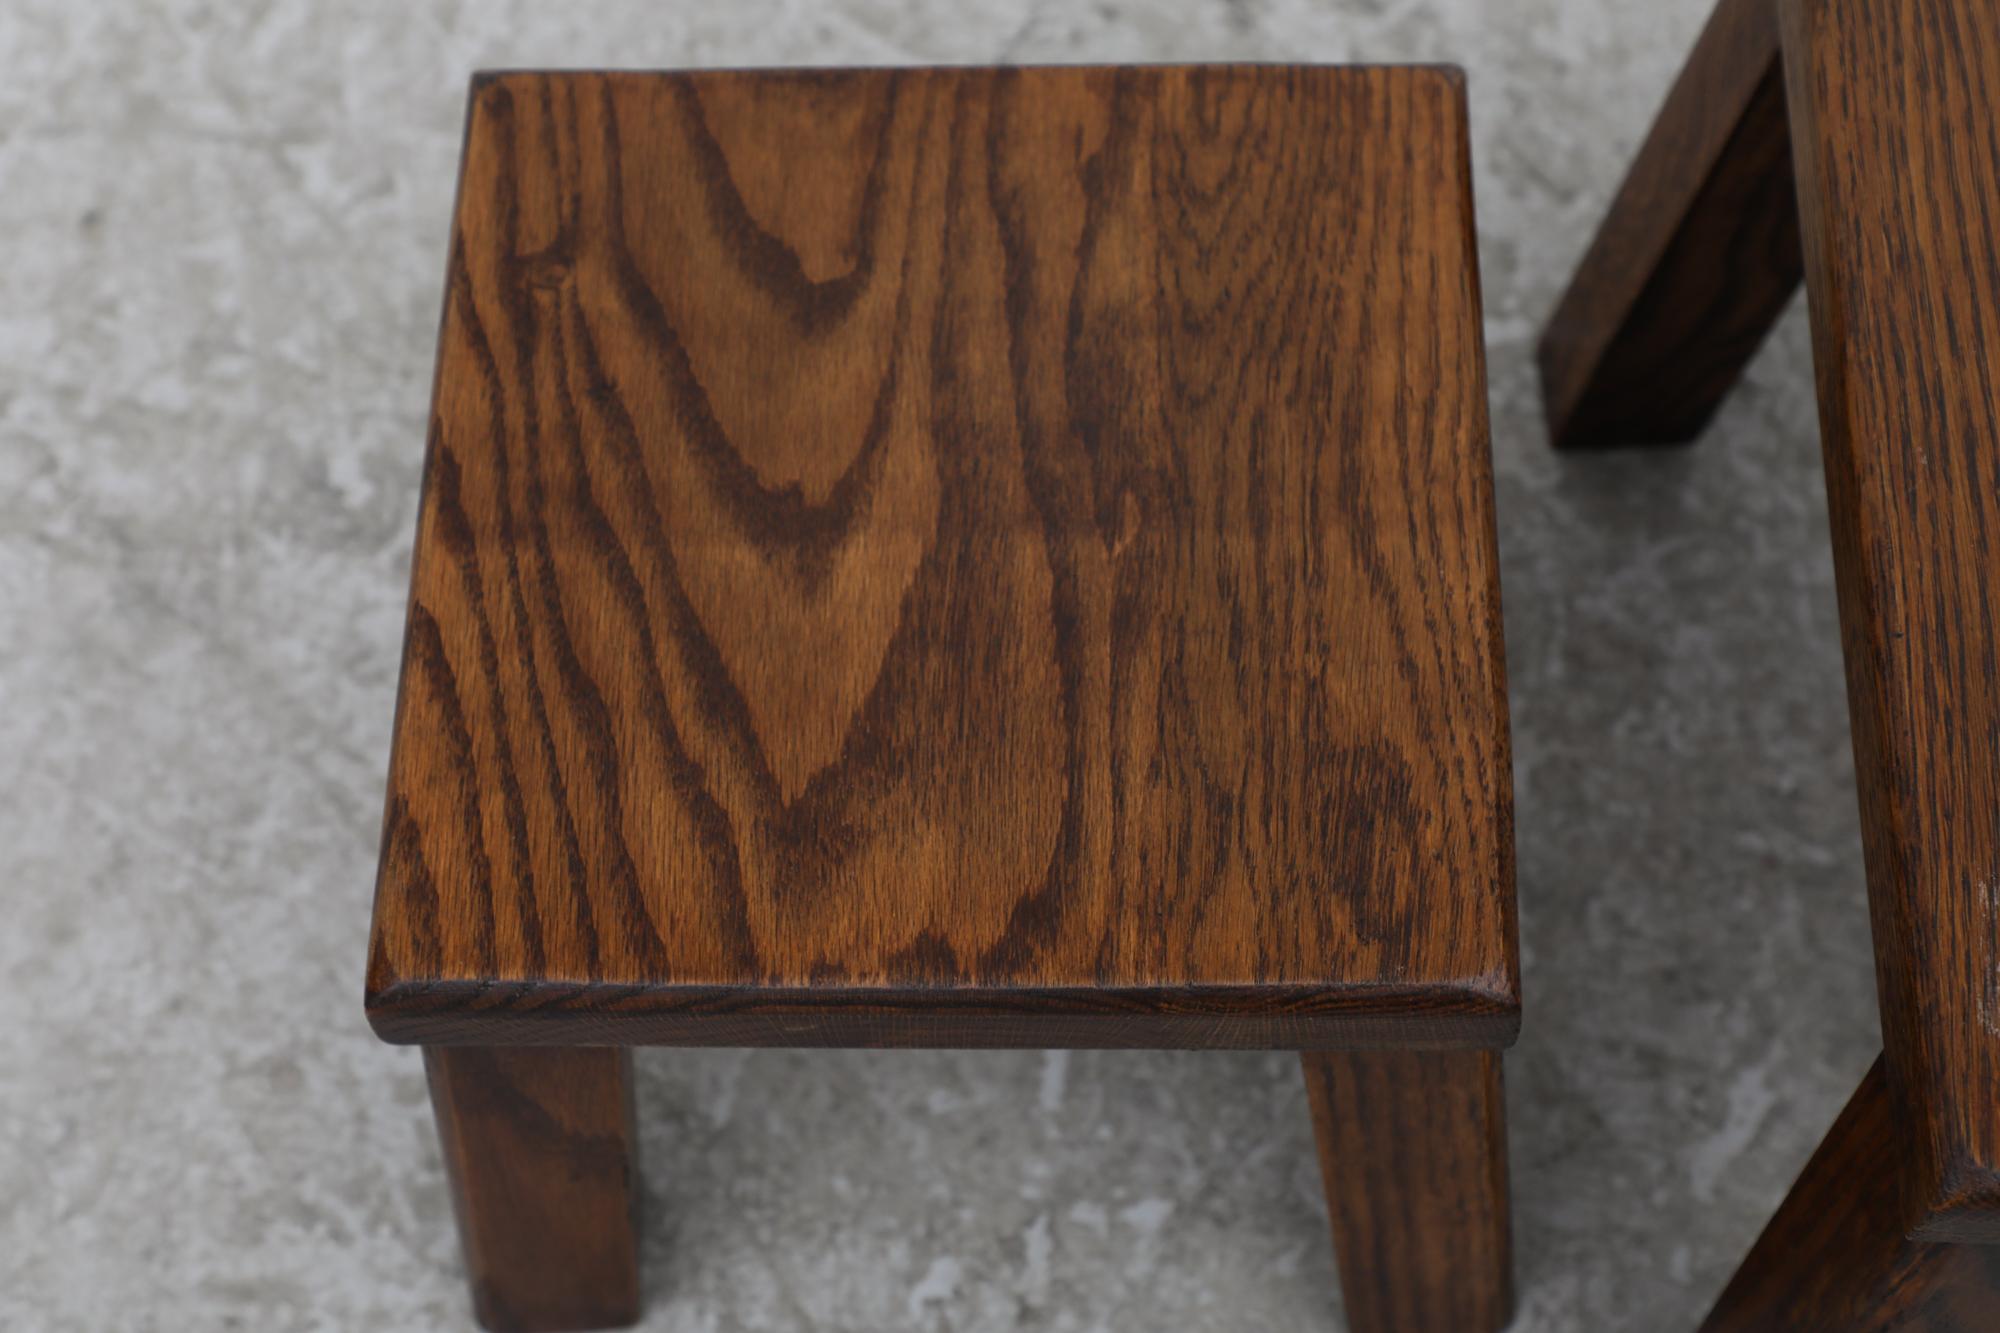 Pierre Chapo Inspired Dark Oak Brutalist Nesting Tables w/ Thick Angled Legs For Sale 6